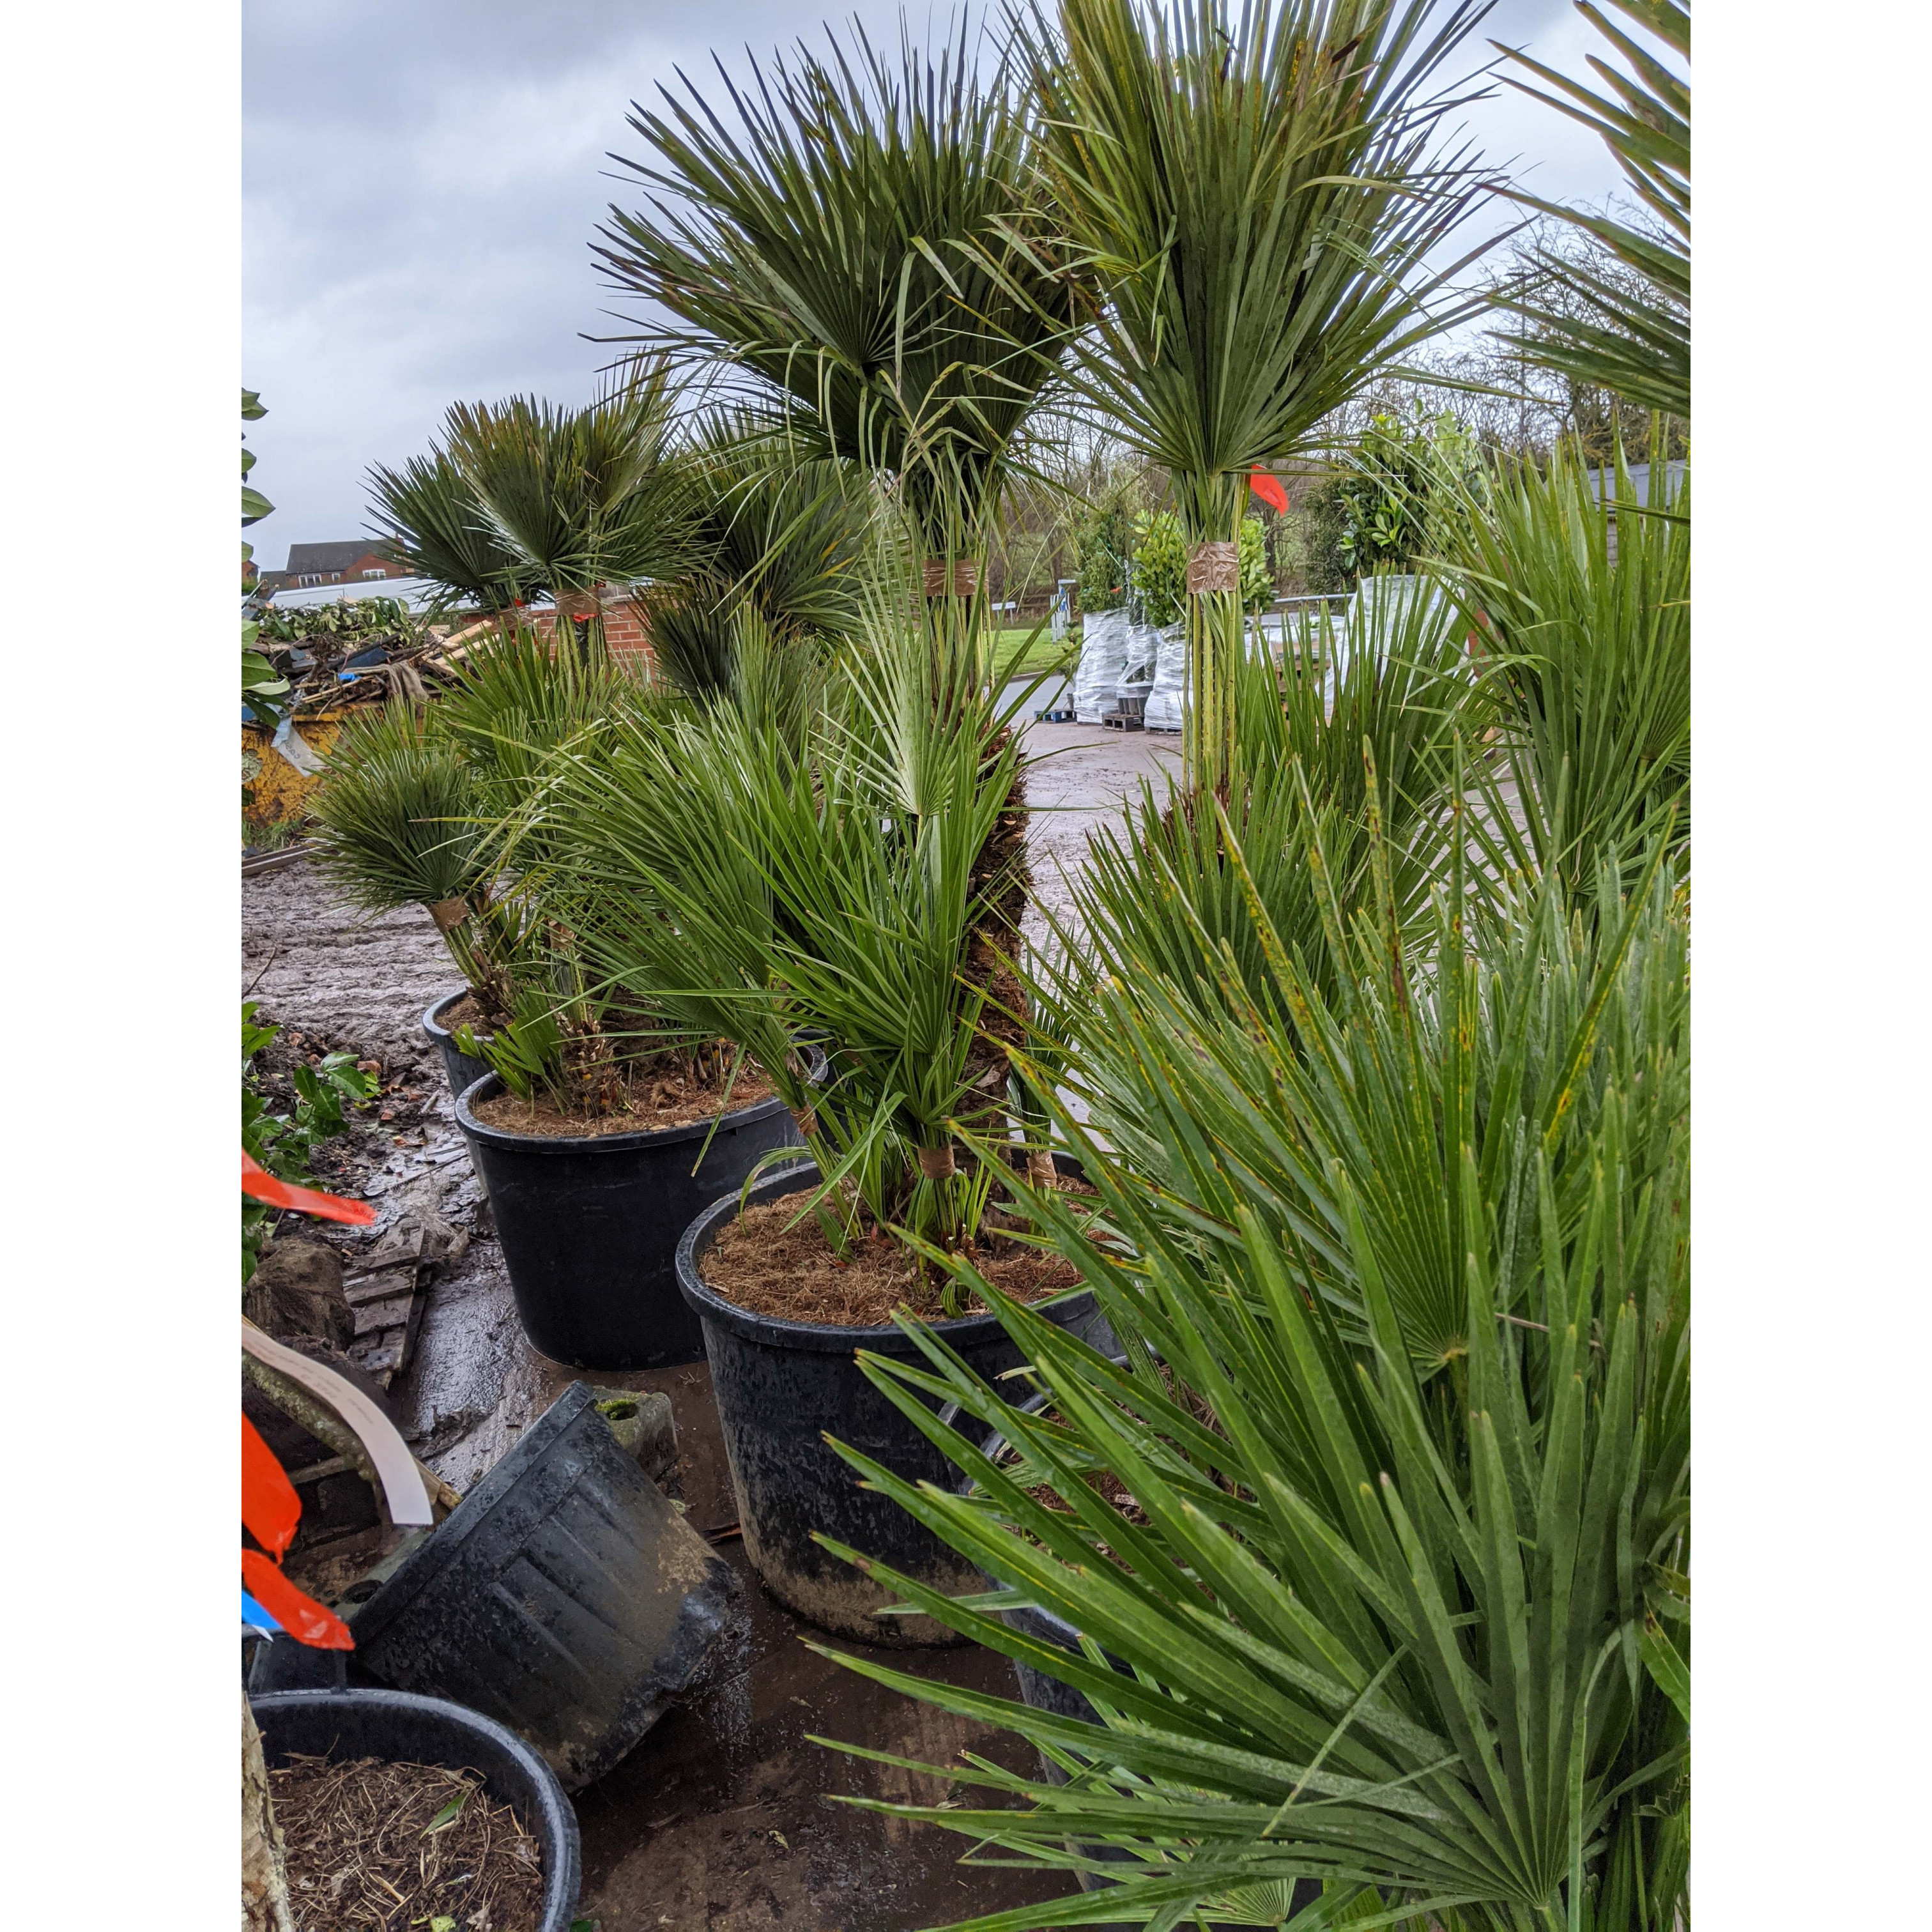 Chamaerops Humilis Fan Palm 180 - 195cm / 6 - 6ft 6in including pot height